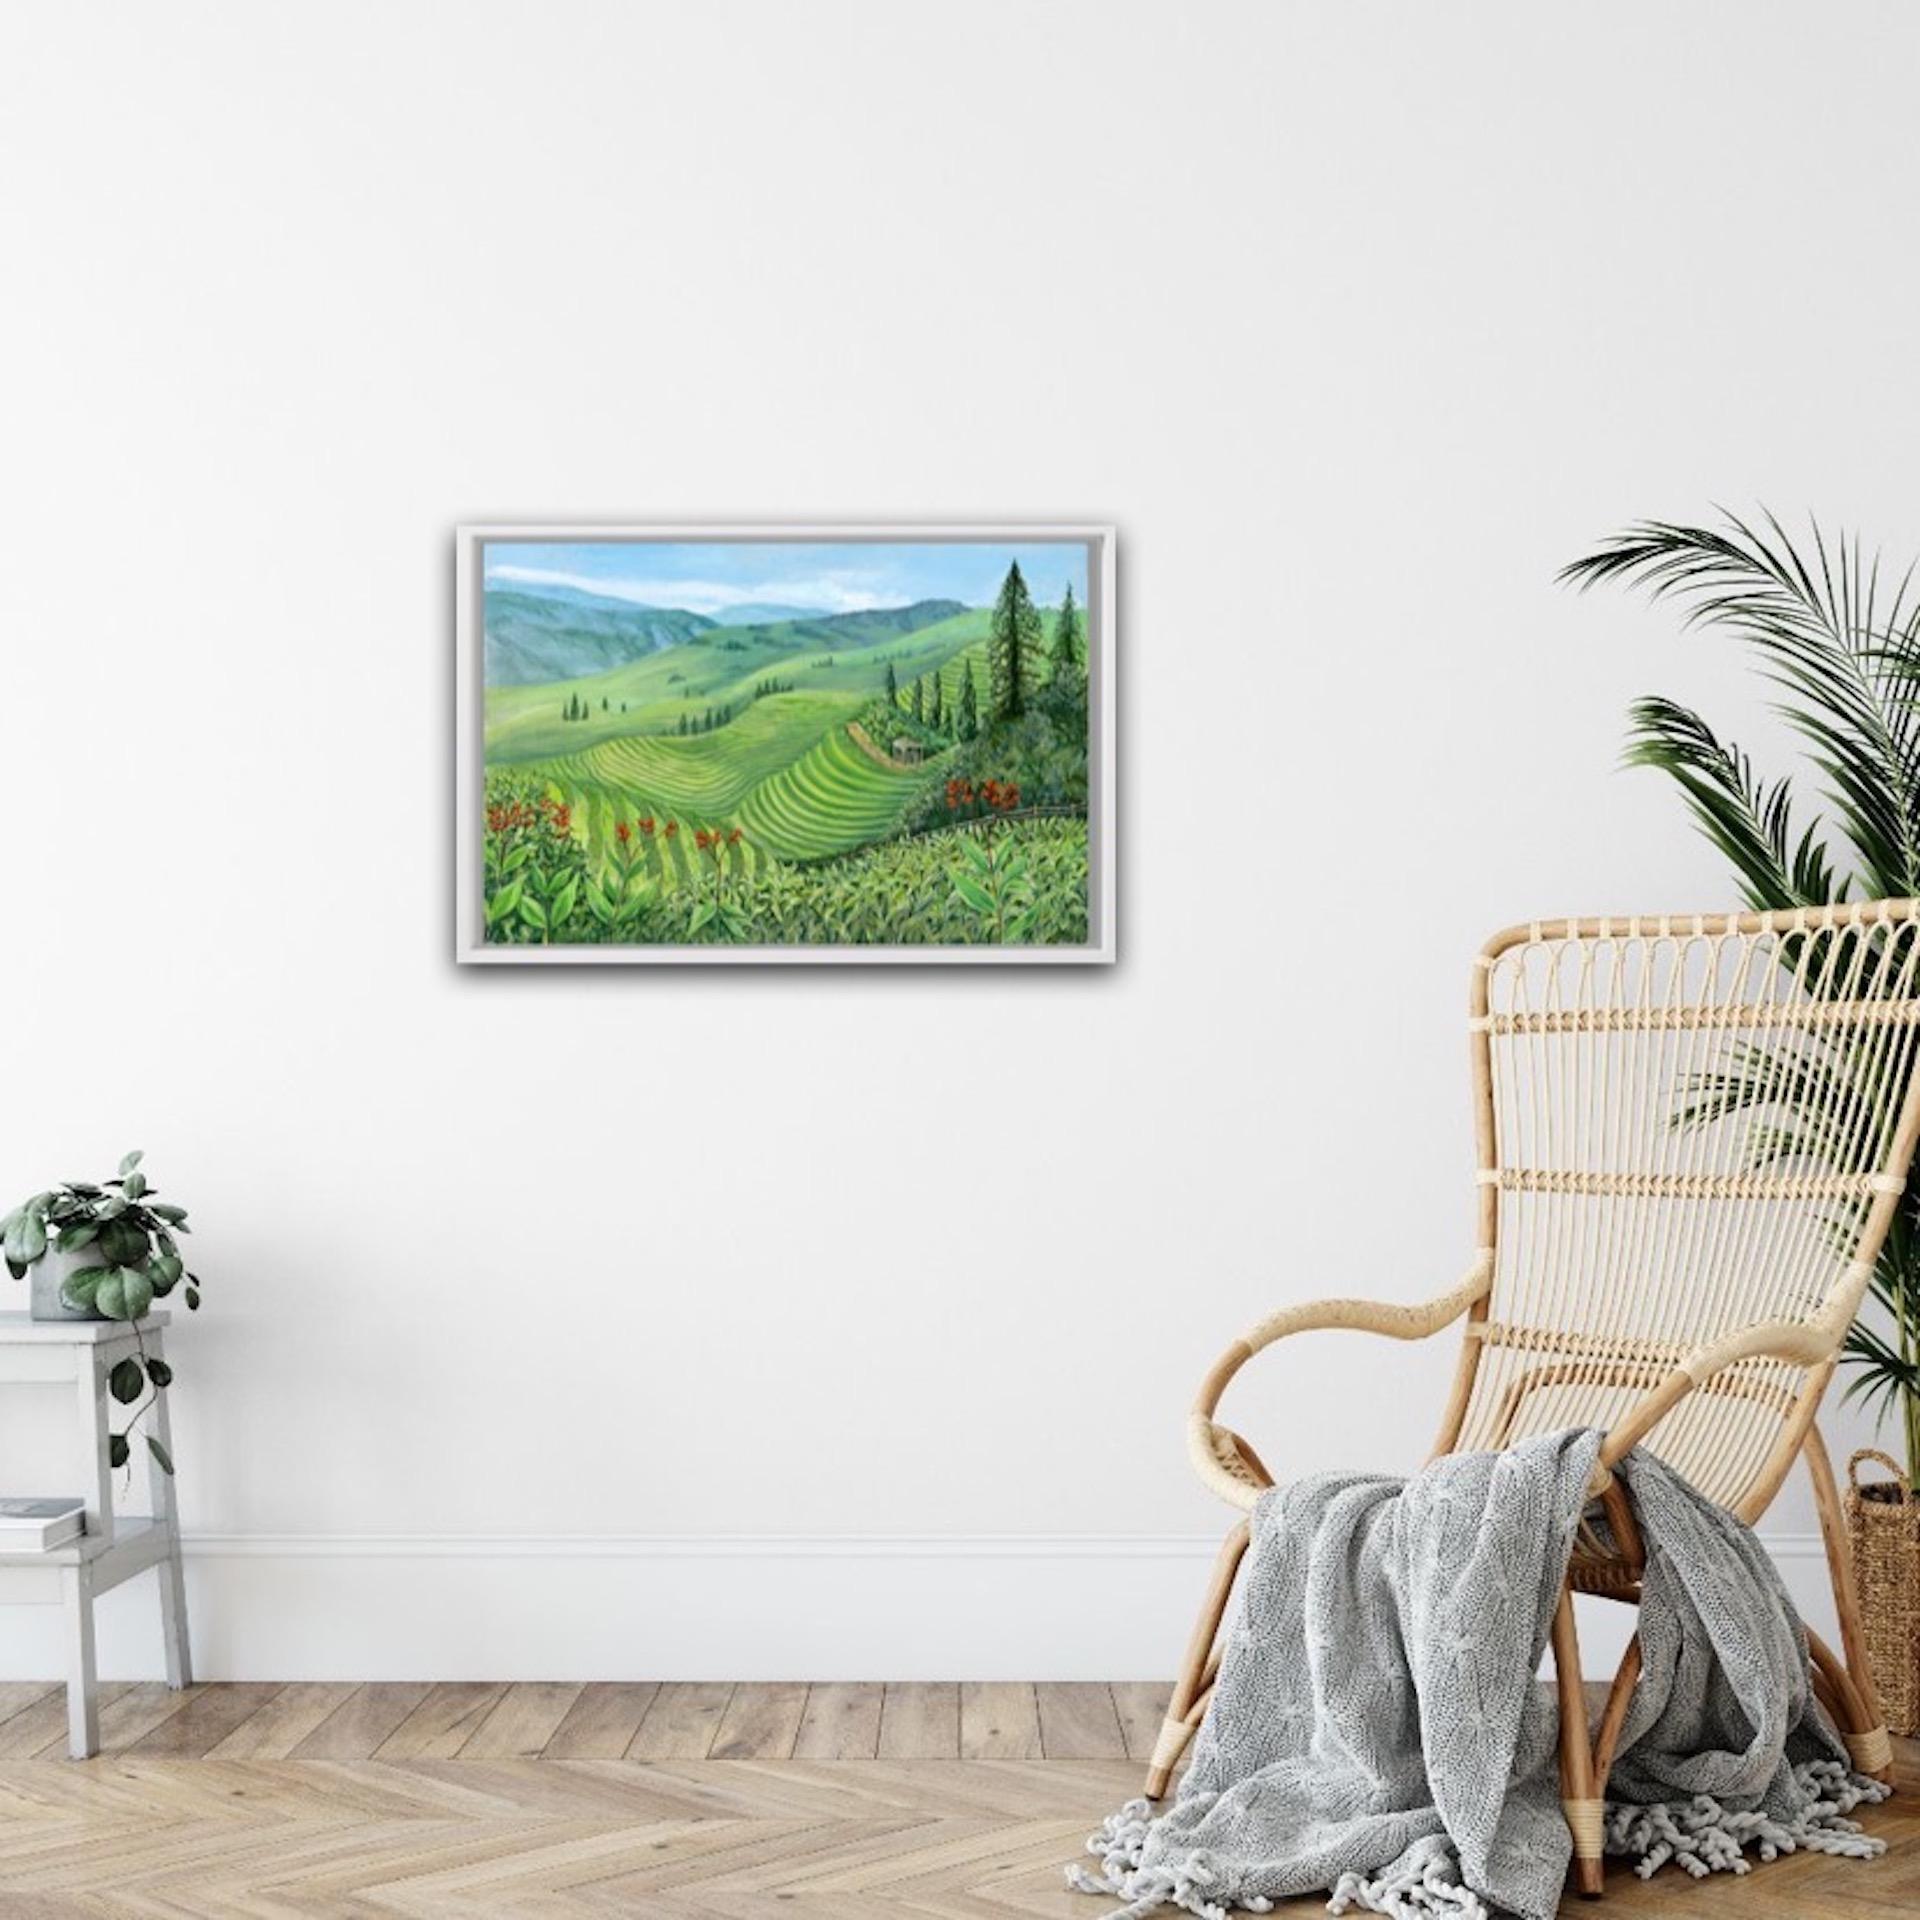 Jane Peart
Pudi Rice Terraces
Original Painting
Acrylic on Canvas
Size: H 50cm x W 76cm
Sold unframed
Free shipping
Please note that in situ images are purely an indication of how the piece may look.

Pudi Rice Terraces, is an original painting by